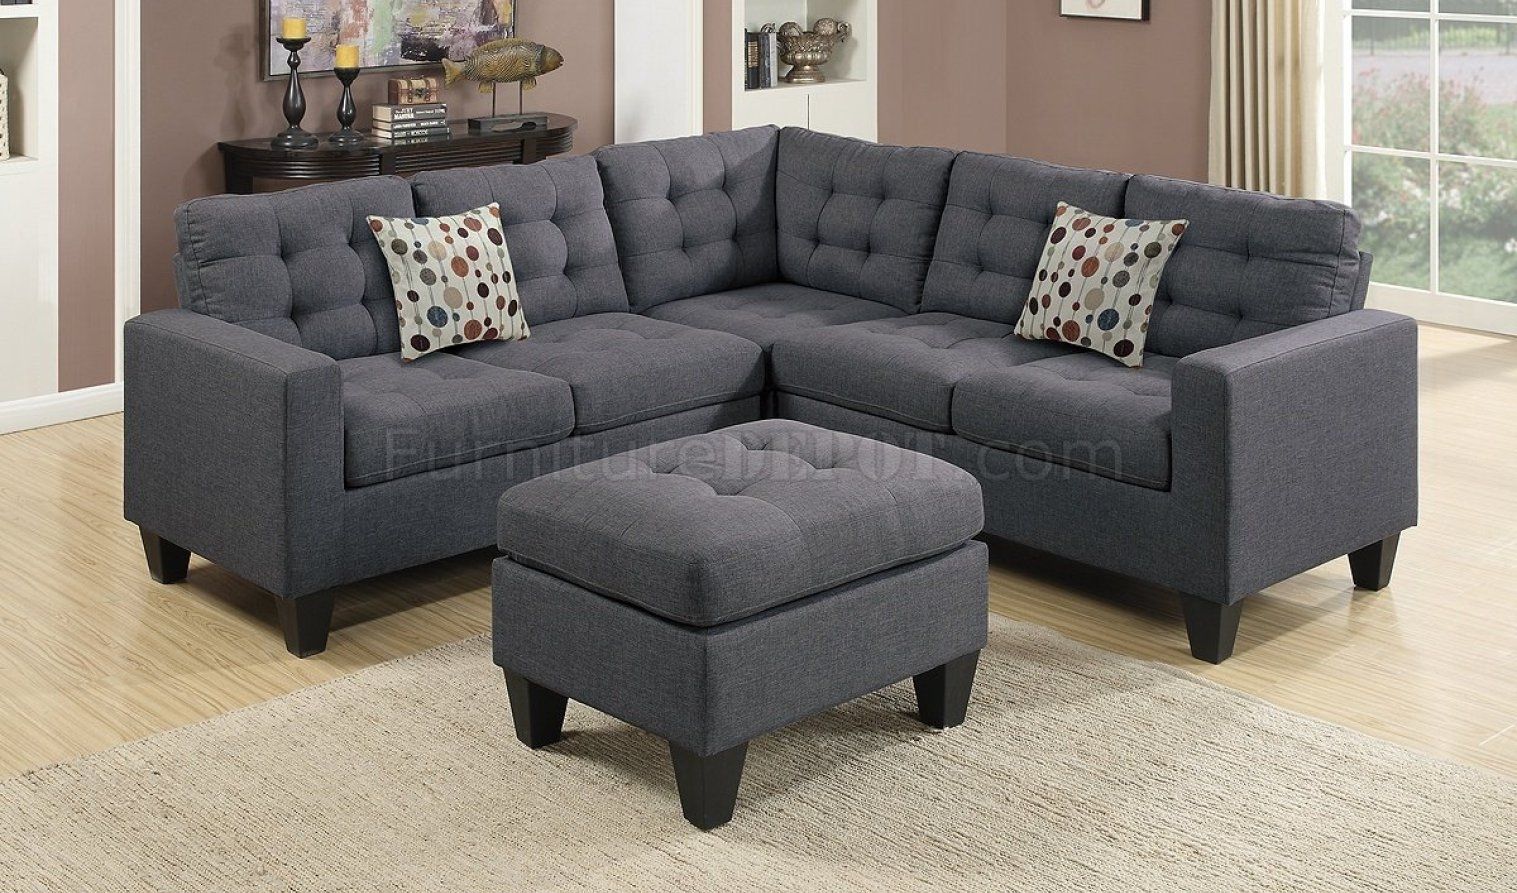 Cleaner : Navy Microfiber Sofa Exotic Reclining Sofas‚ Imposing Regarding Little Rock Ar Sectional Sofas (View 2 of 10)